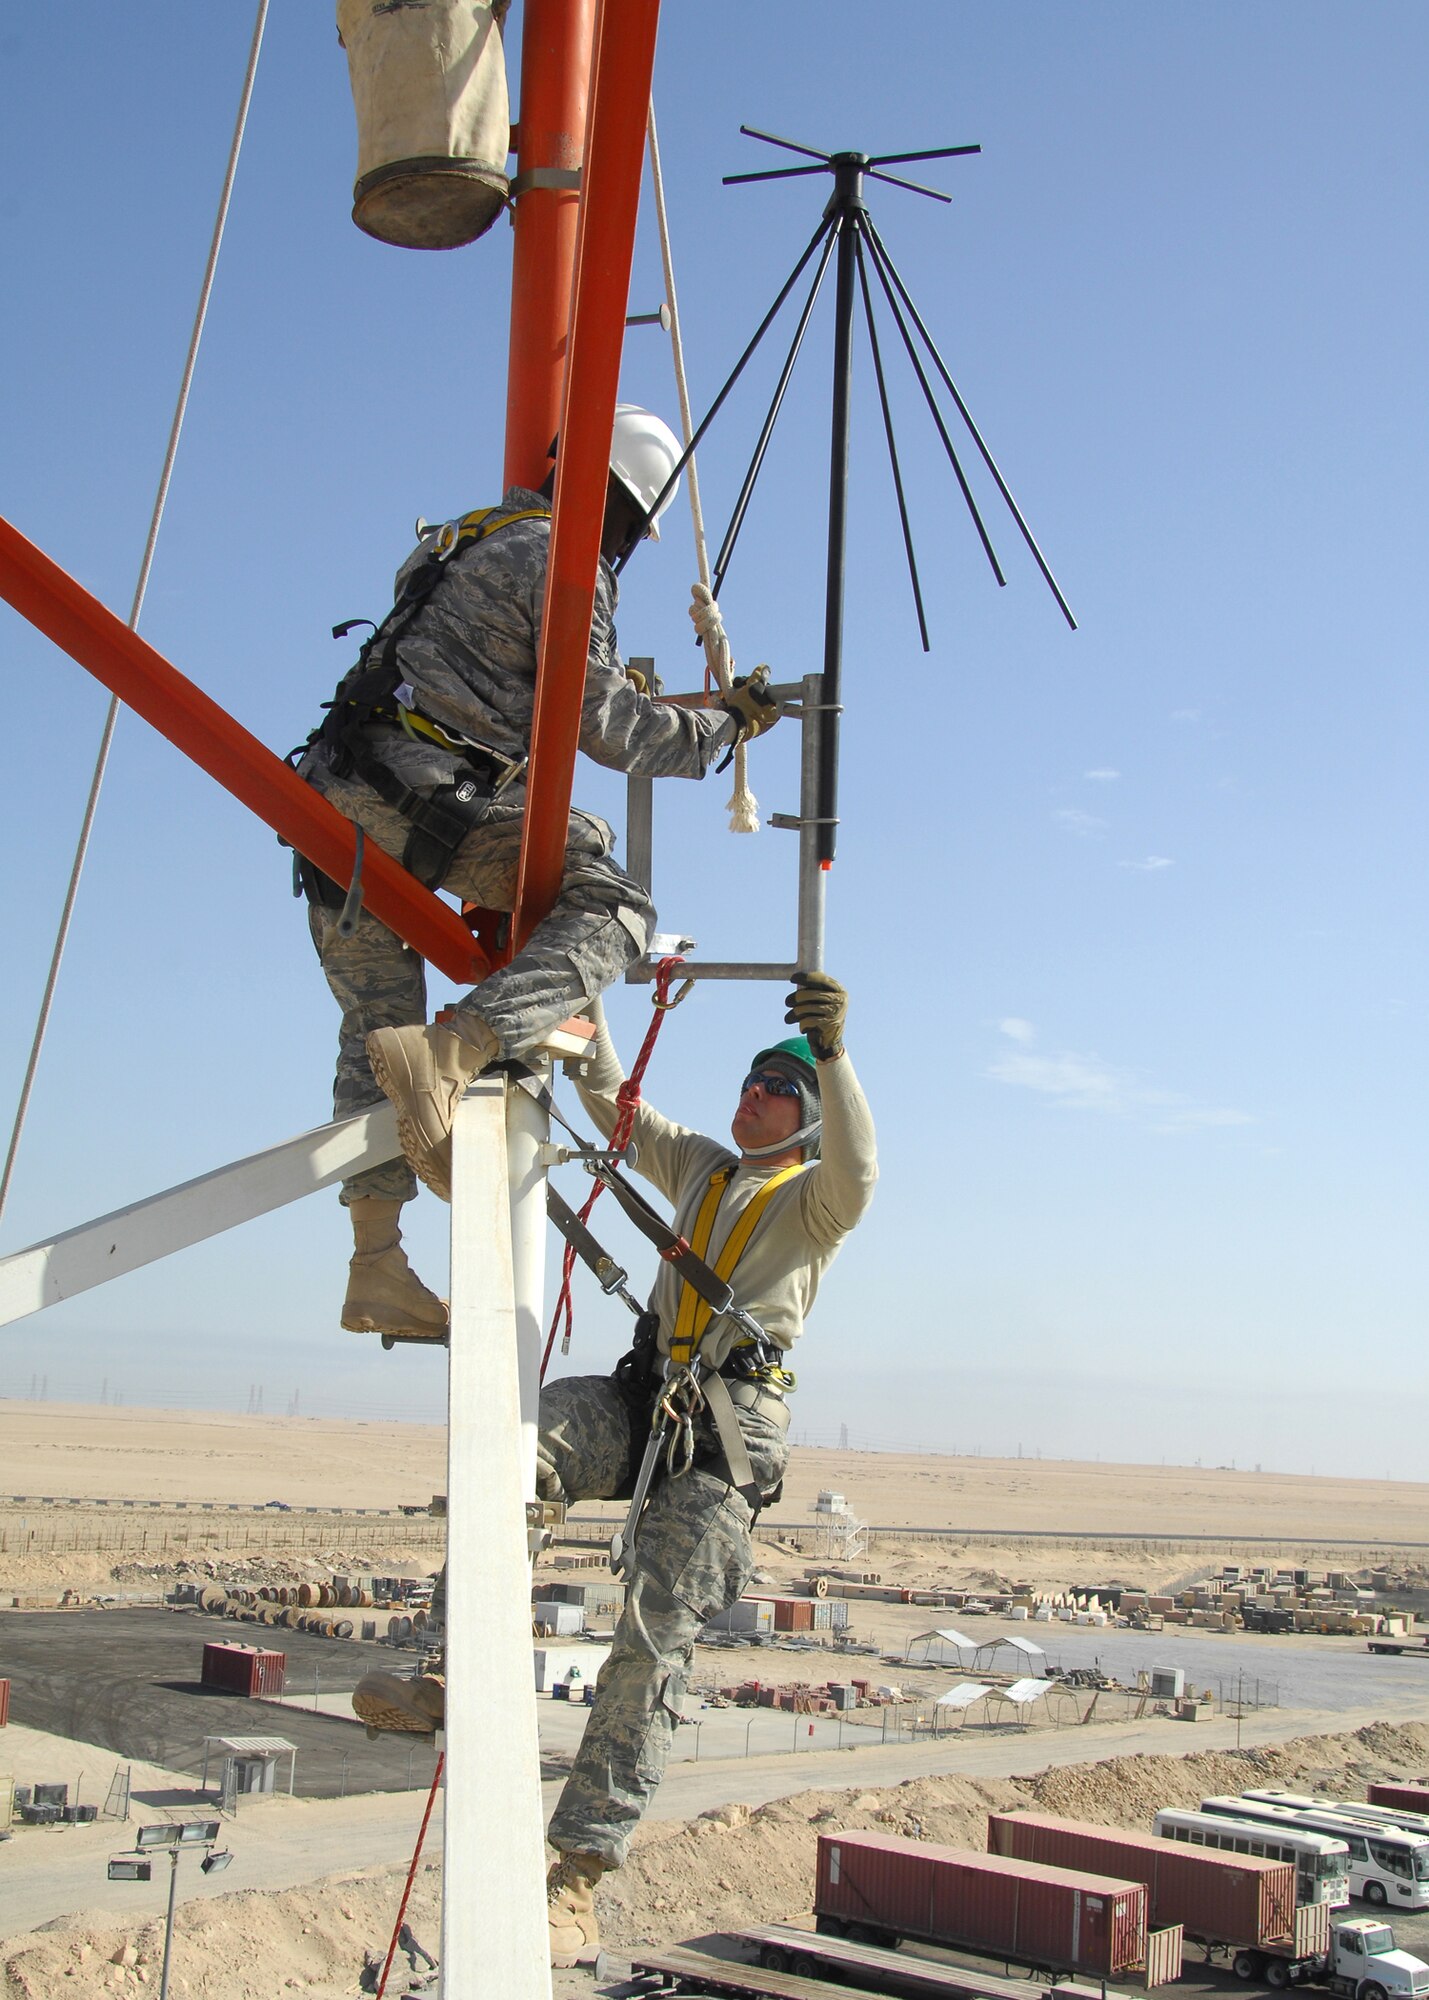 SOUTHWEST ASIA -- Staff Sgt. Ryan Trandell, bottom, and Senior Airman Lakendrick Fisher, 386th Expeditionary Communication Squadron Cable and Antenna Maintenance technicians, install a Radio Over Internet Protocol (ROIP) antenna on a communications tower on Dec. 15 at an air base in Southwest Asia. The 386th ECS Cable Maintenance shop provides command and control capabilities through installation, maintenance, fault isolation and reconstitution of fixed cable and wireless distribution systems, local area networks and wide area networks in support of tactical and strategic operations. Sergeant Trandell and Airman Fisher are deployed from Yokota Air Base, Japan. (U.S. Air Force photo/Tech. Sgt. Raheem Moore)